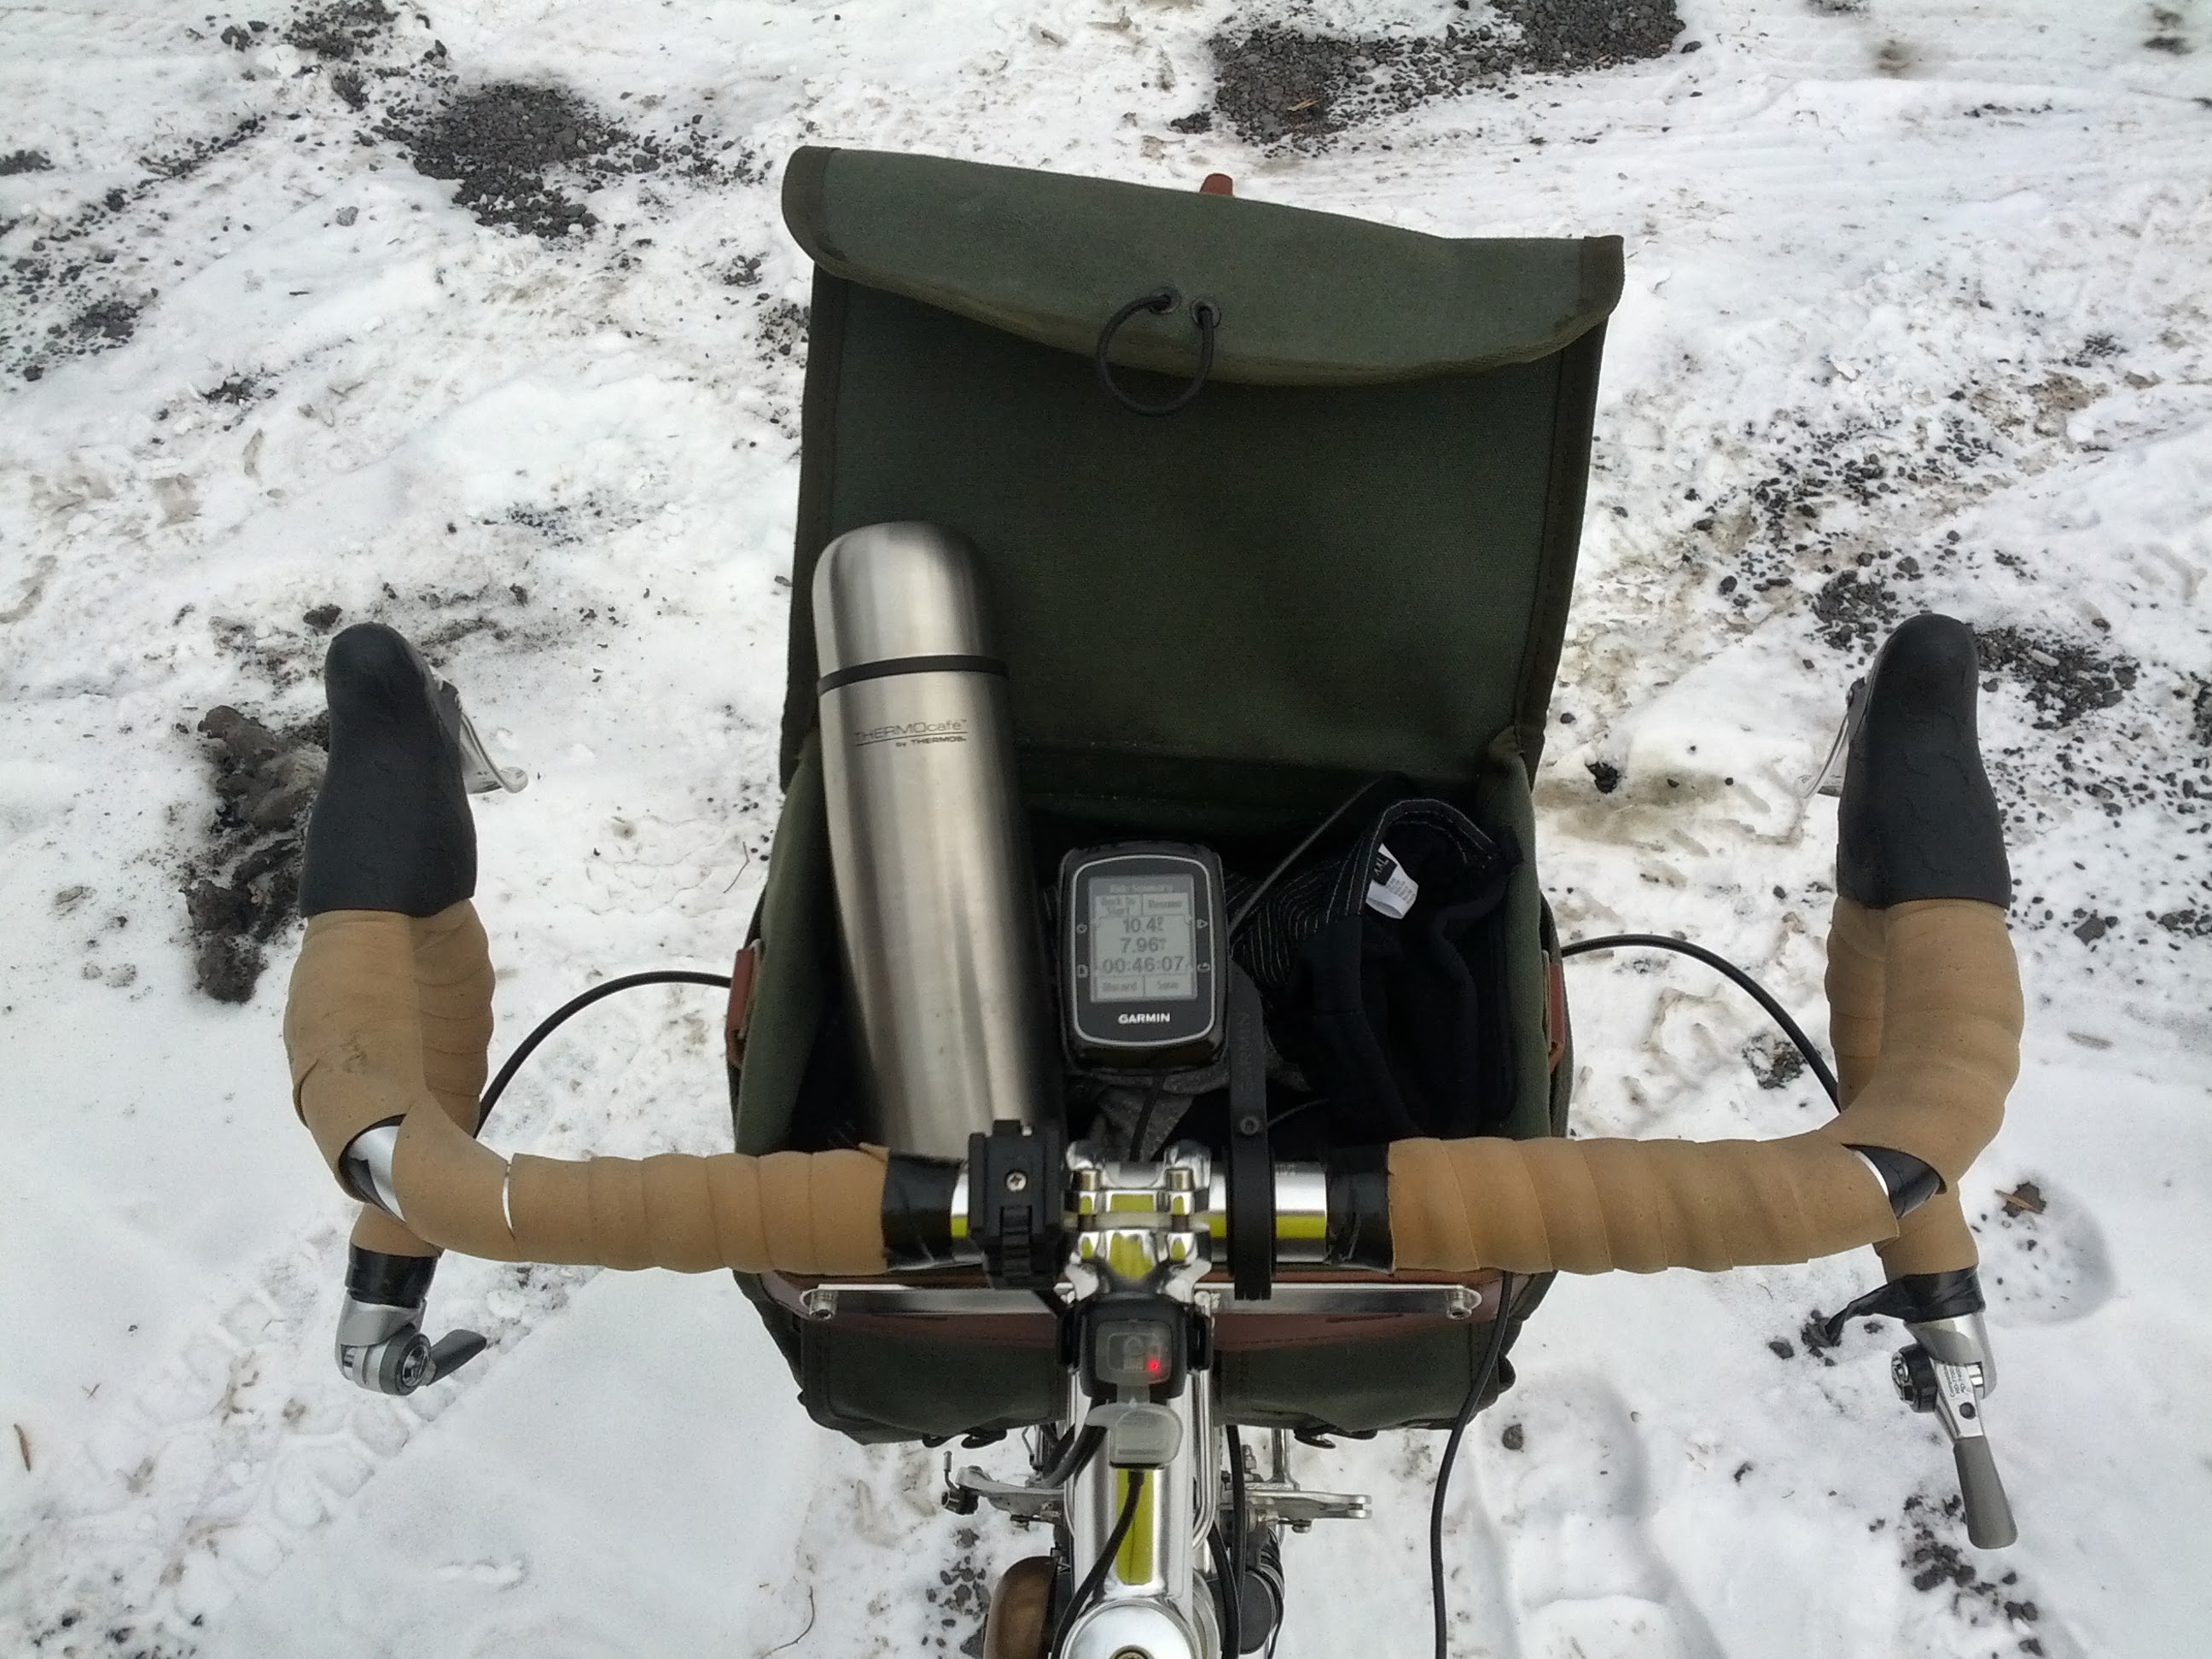 The cockpit of the Cross-Check.  Thermos of hot coffee in the handlebar bag.